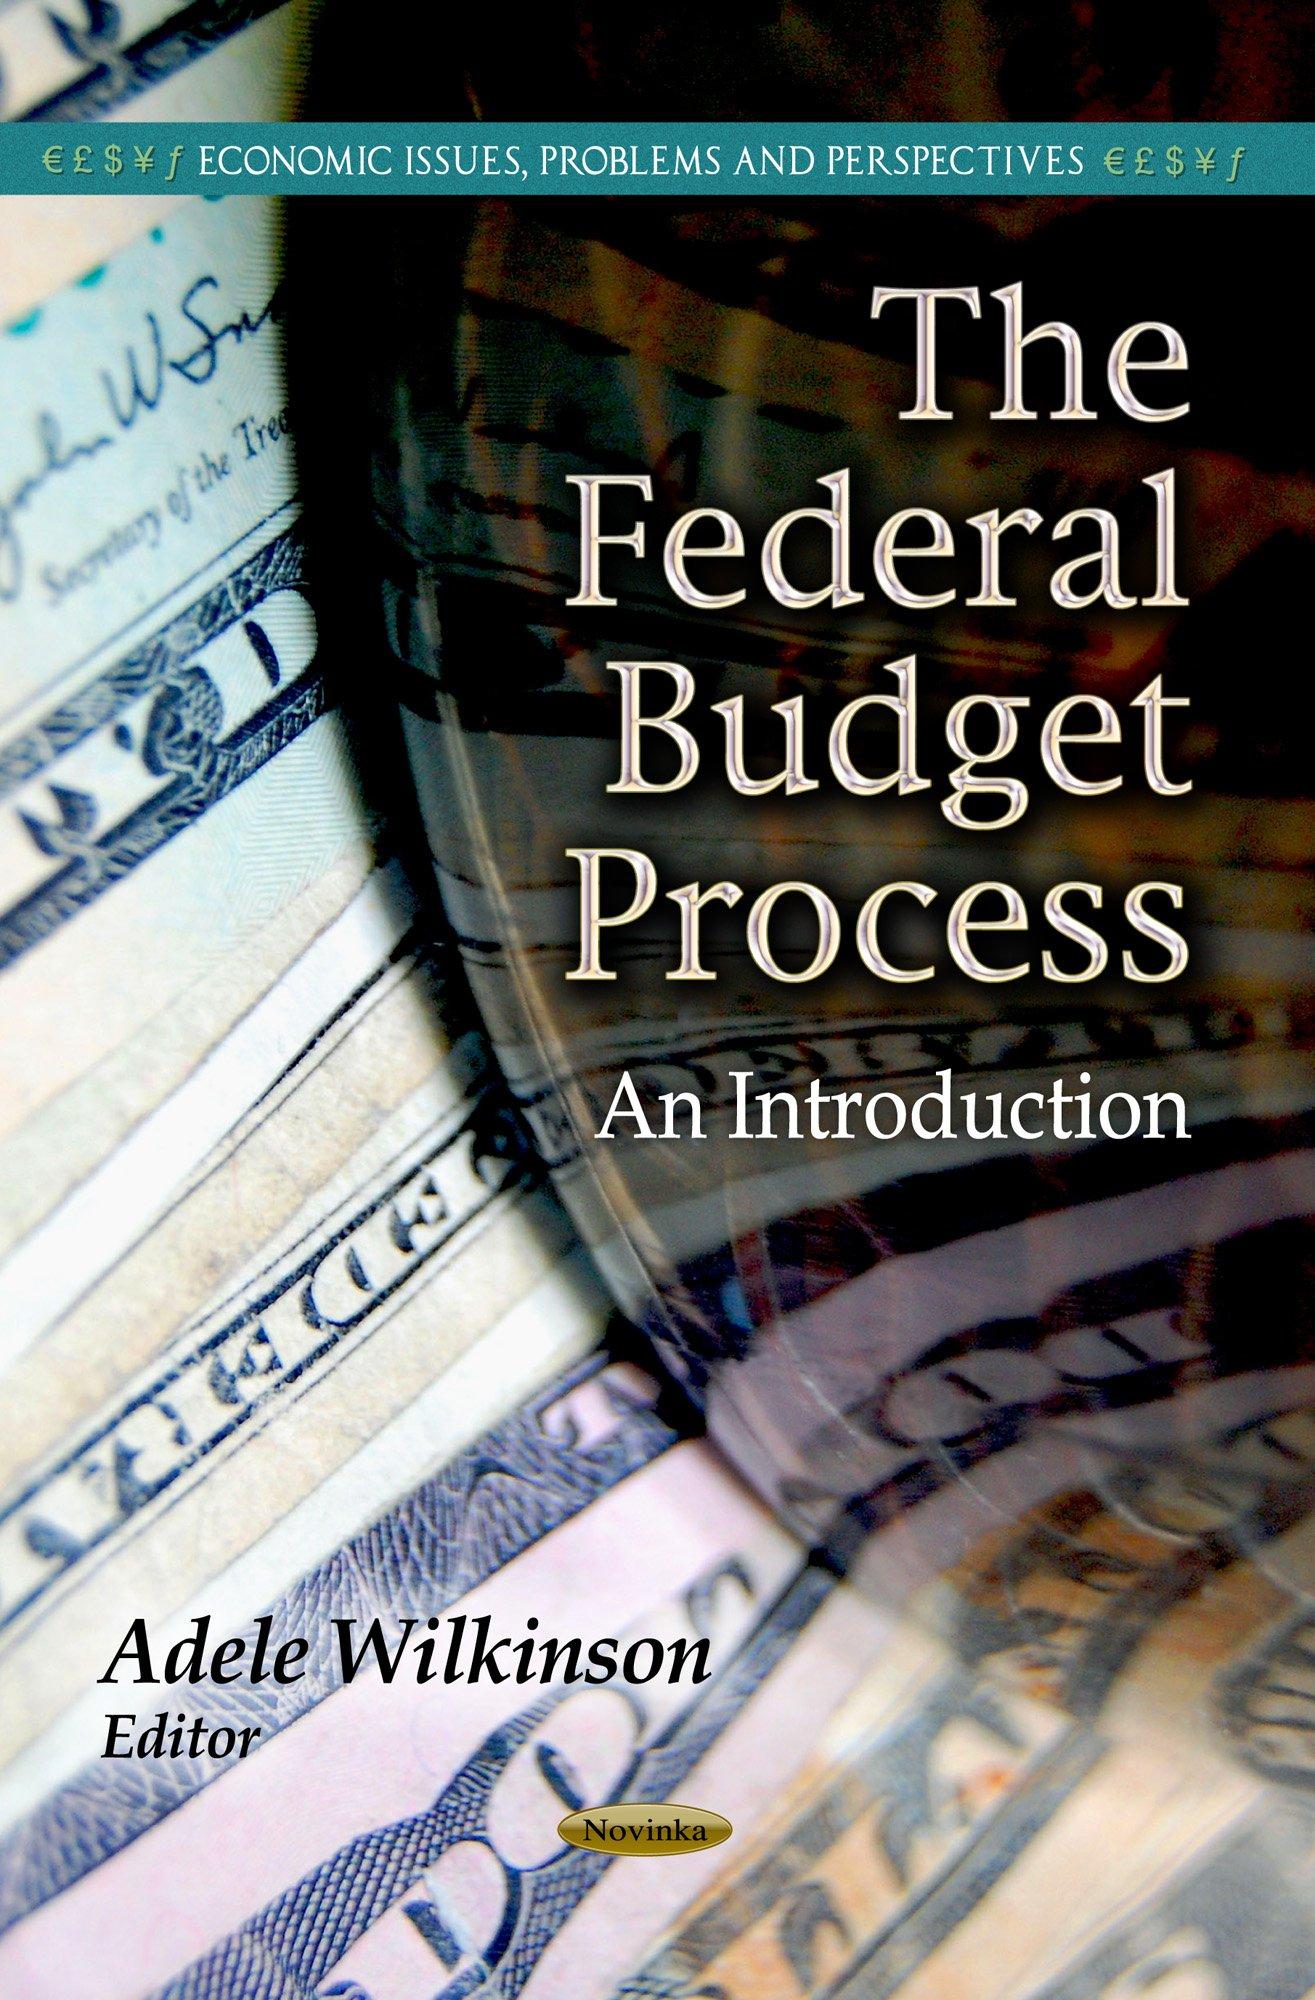 the federal budget process 1st edition adele wilkinson 1624178383, 978-1624178382